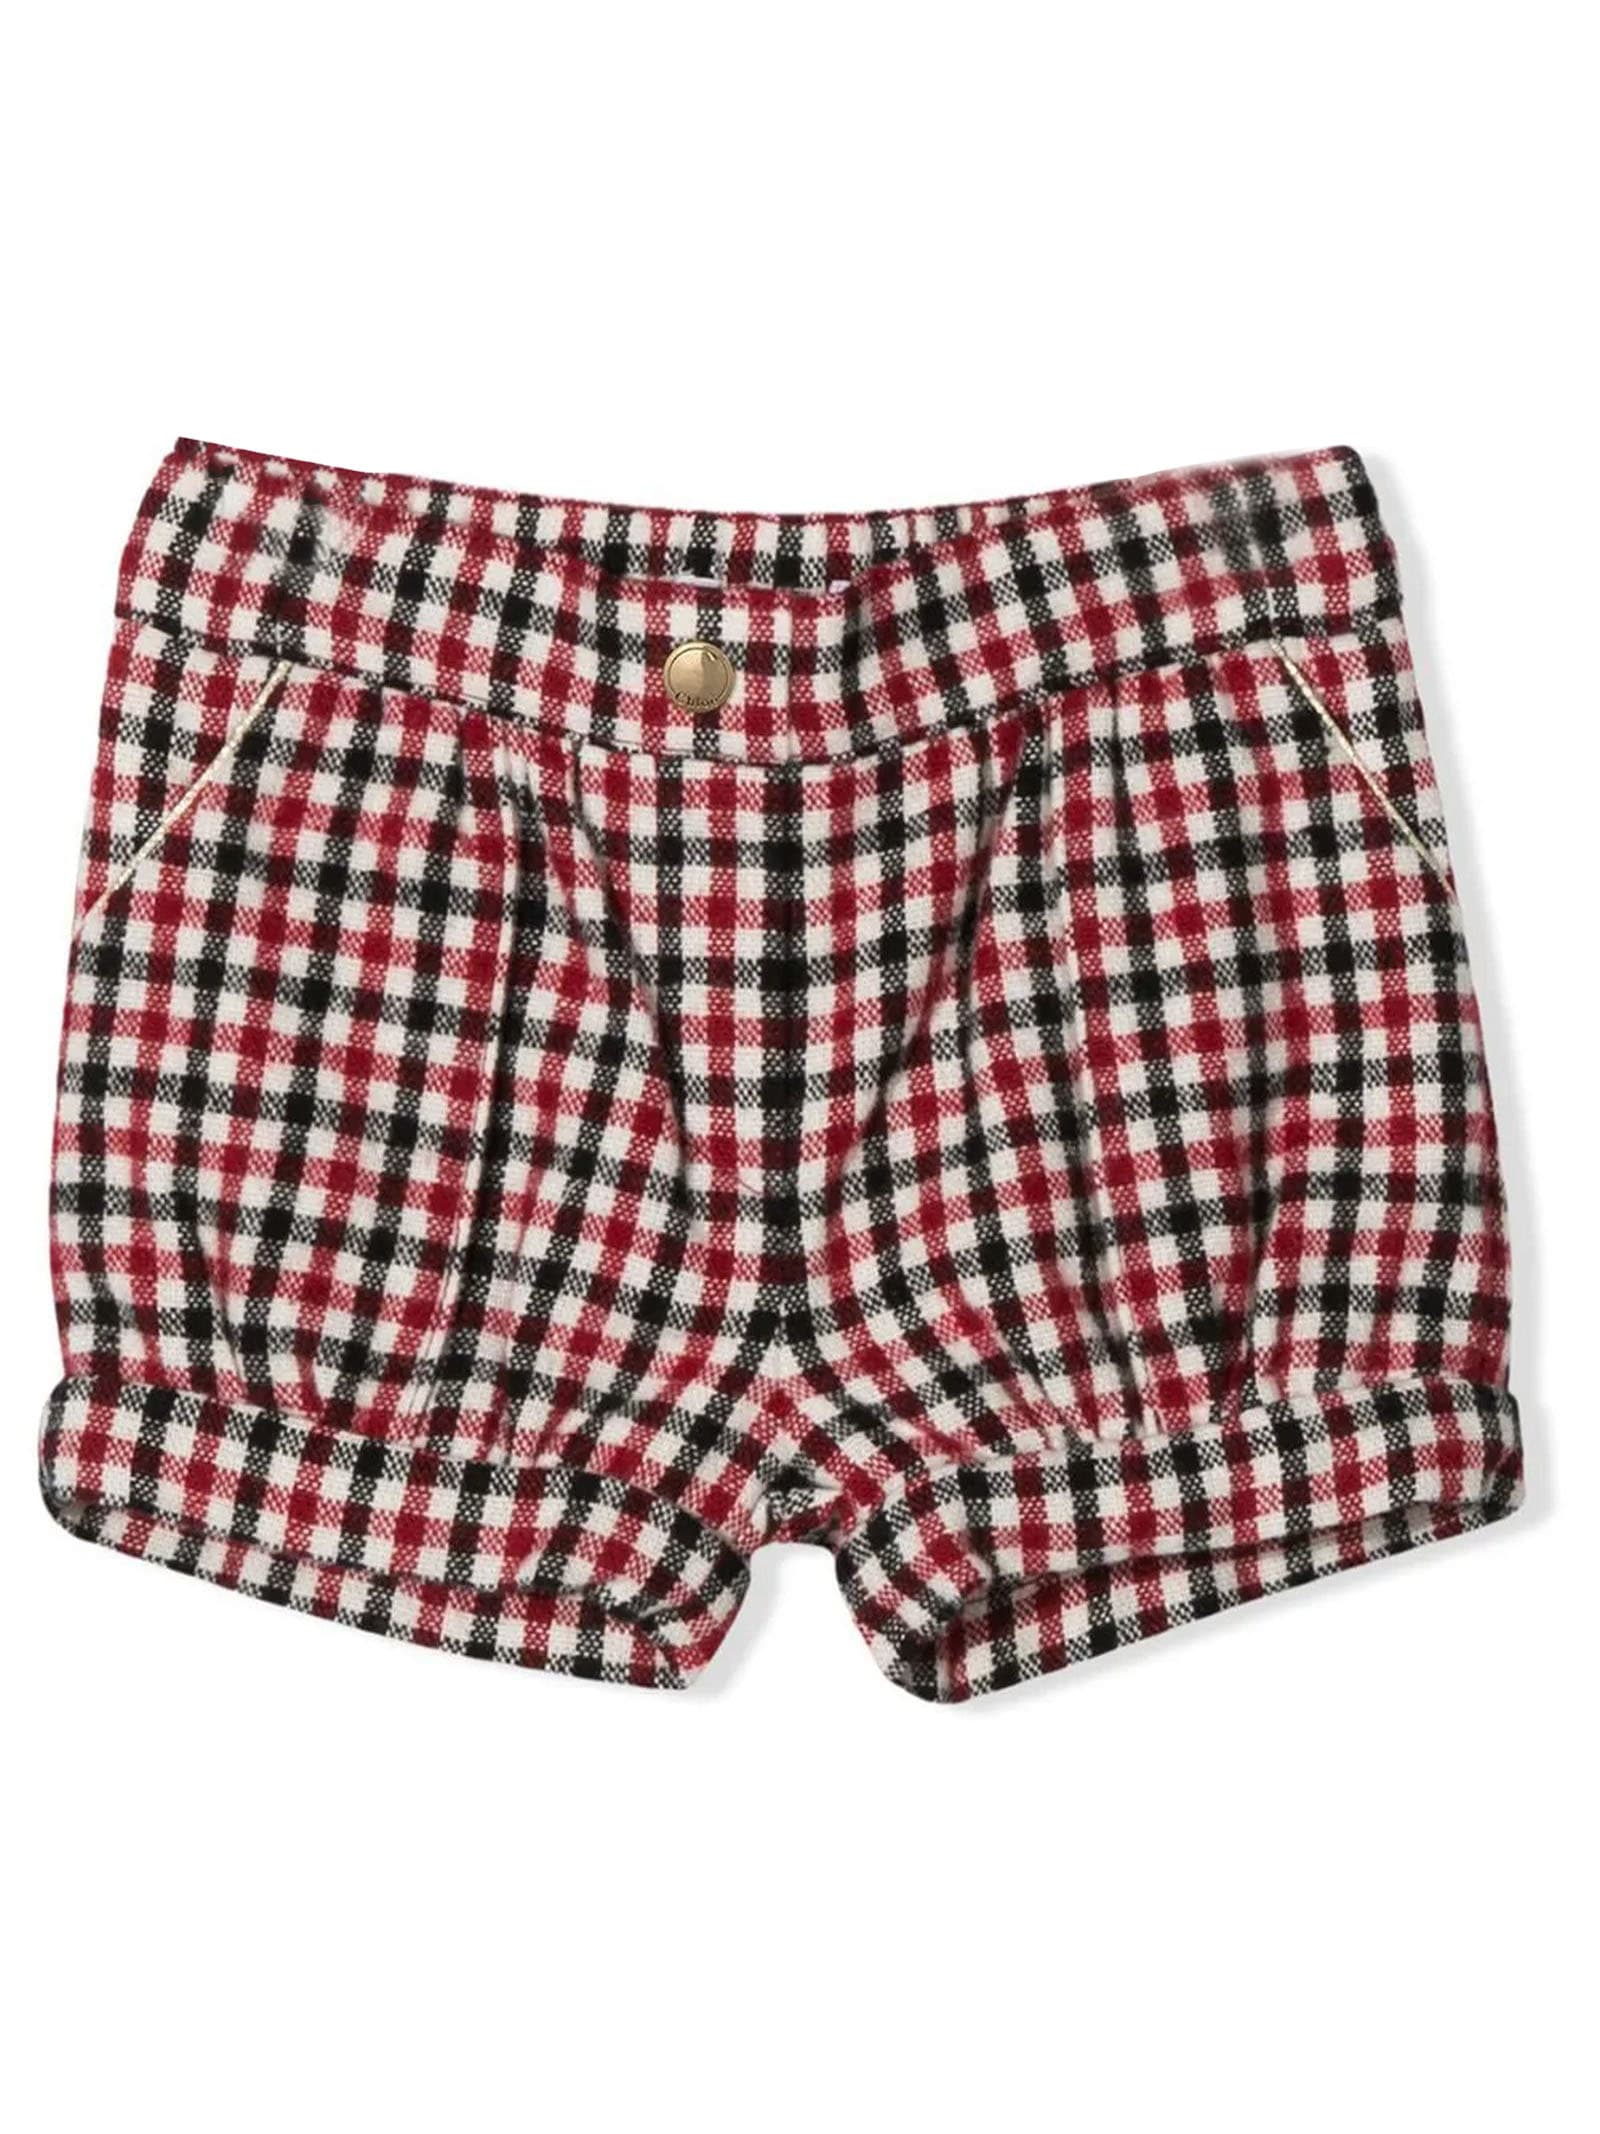 Chloé Red, Black And White Cotton-blend Shorts